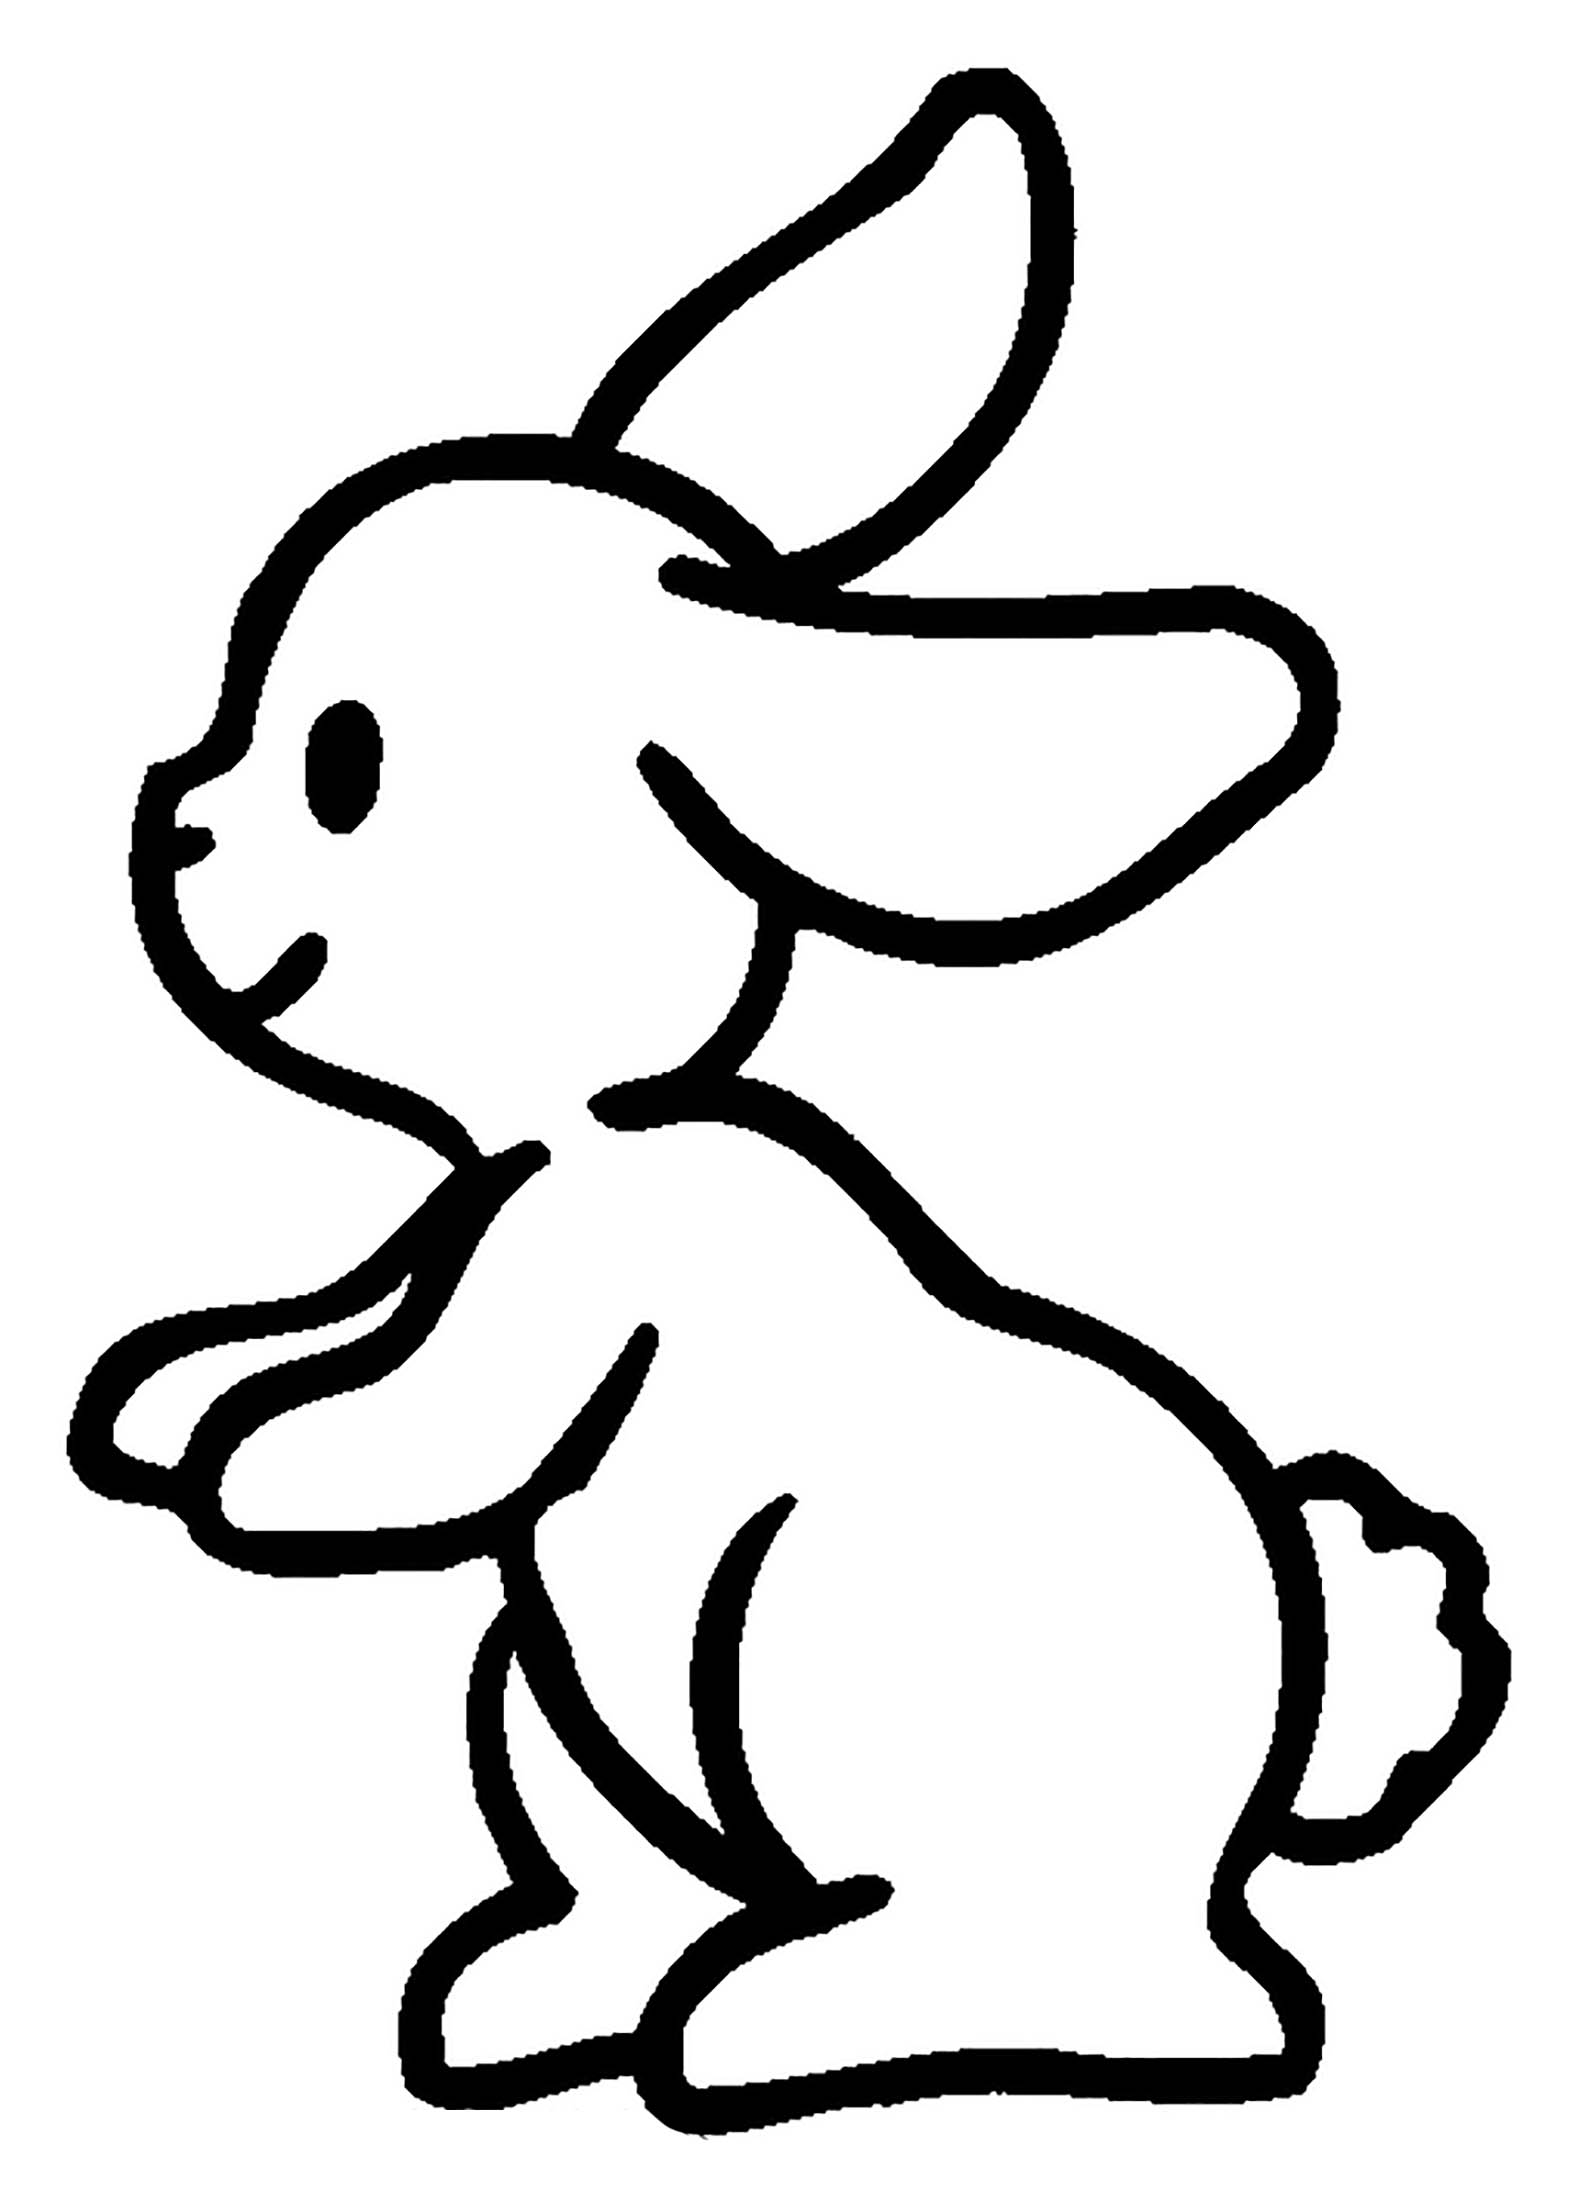 Download Rabbit for children - Rabbit Kids Coloring Pages